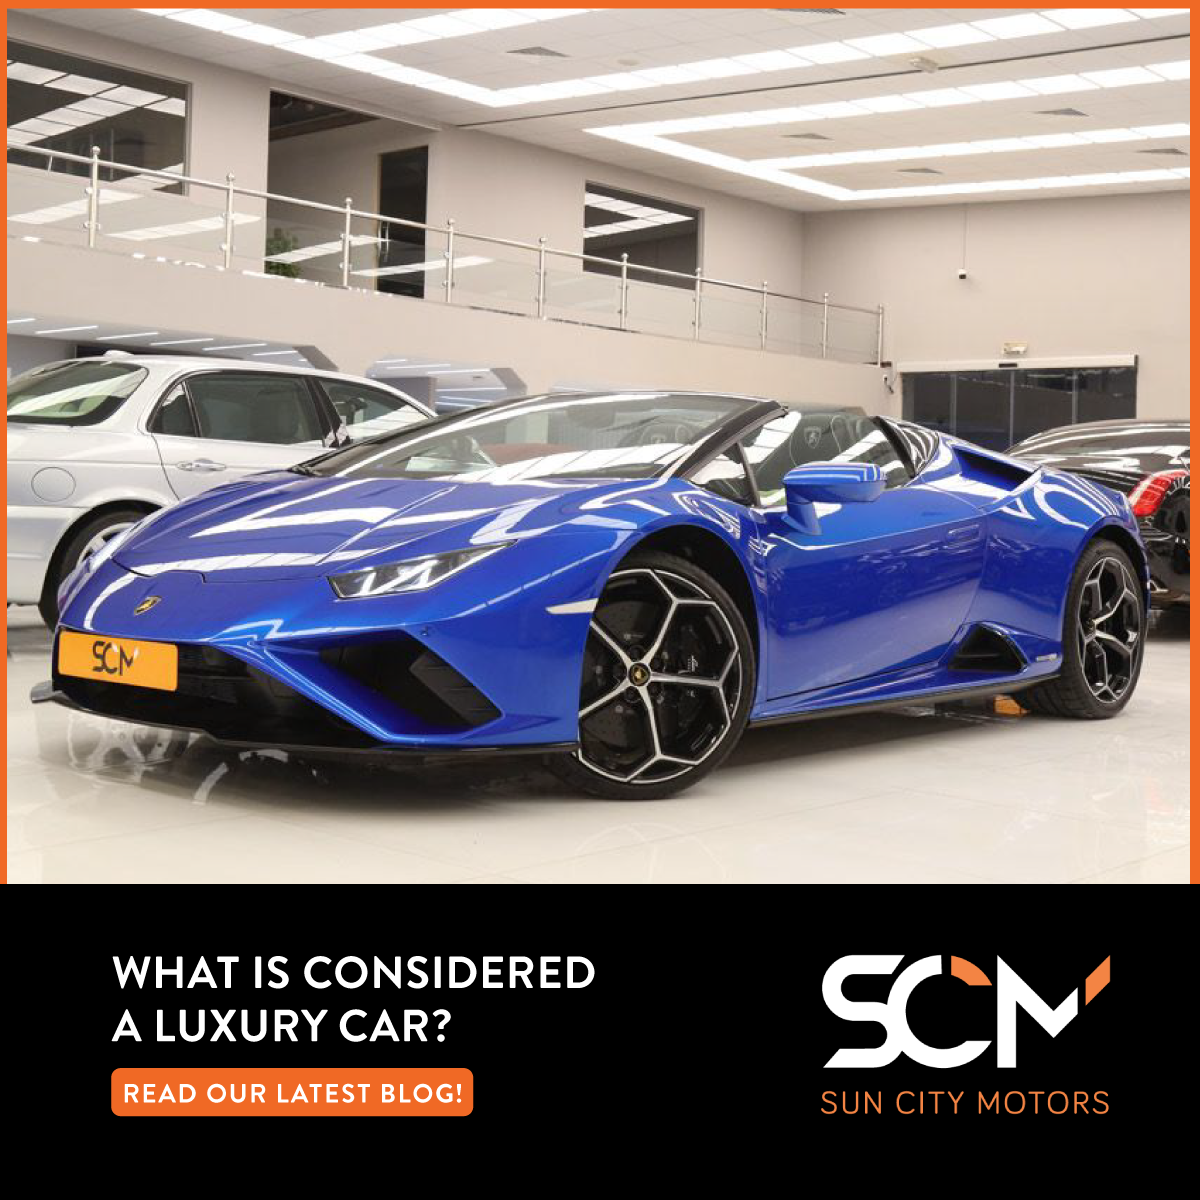 What is Considered a Luxury Car?